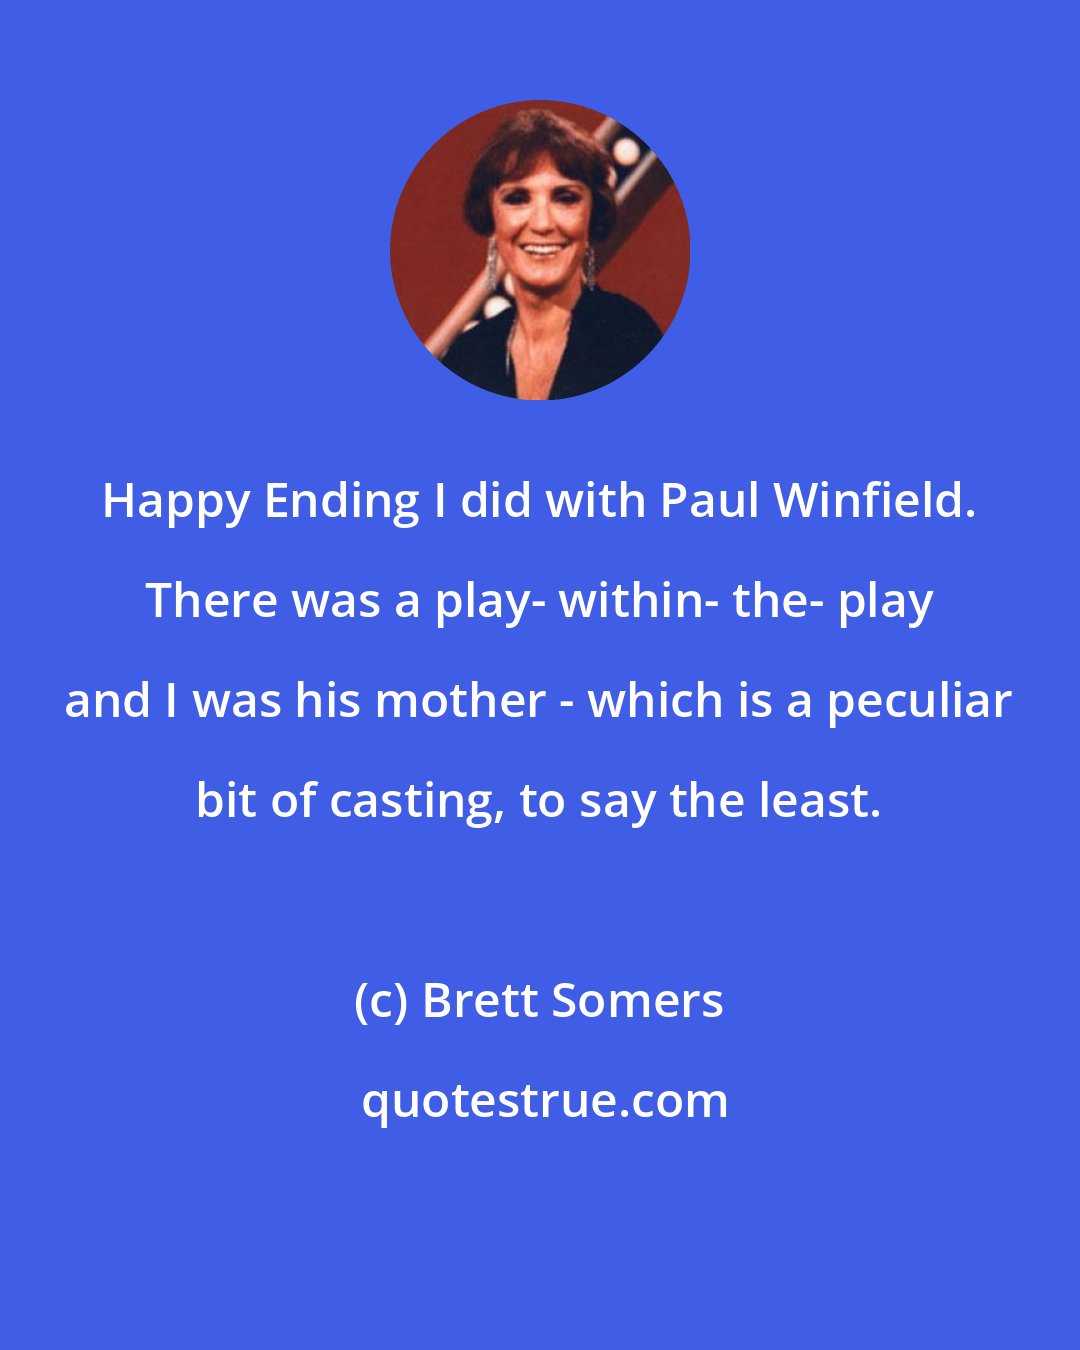 Brett Somers: Happy Ending I did with Paul Winfield. There was a play- within- the- play and I was his mother - which is a peculiar bit of casting, to say the least.